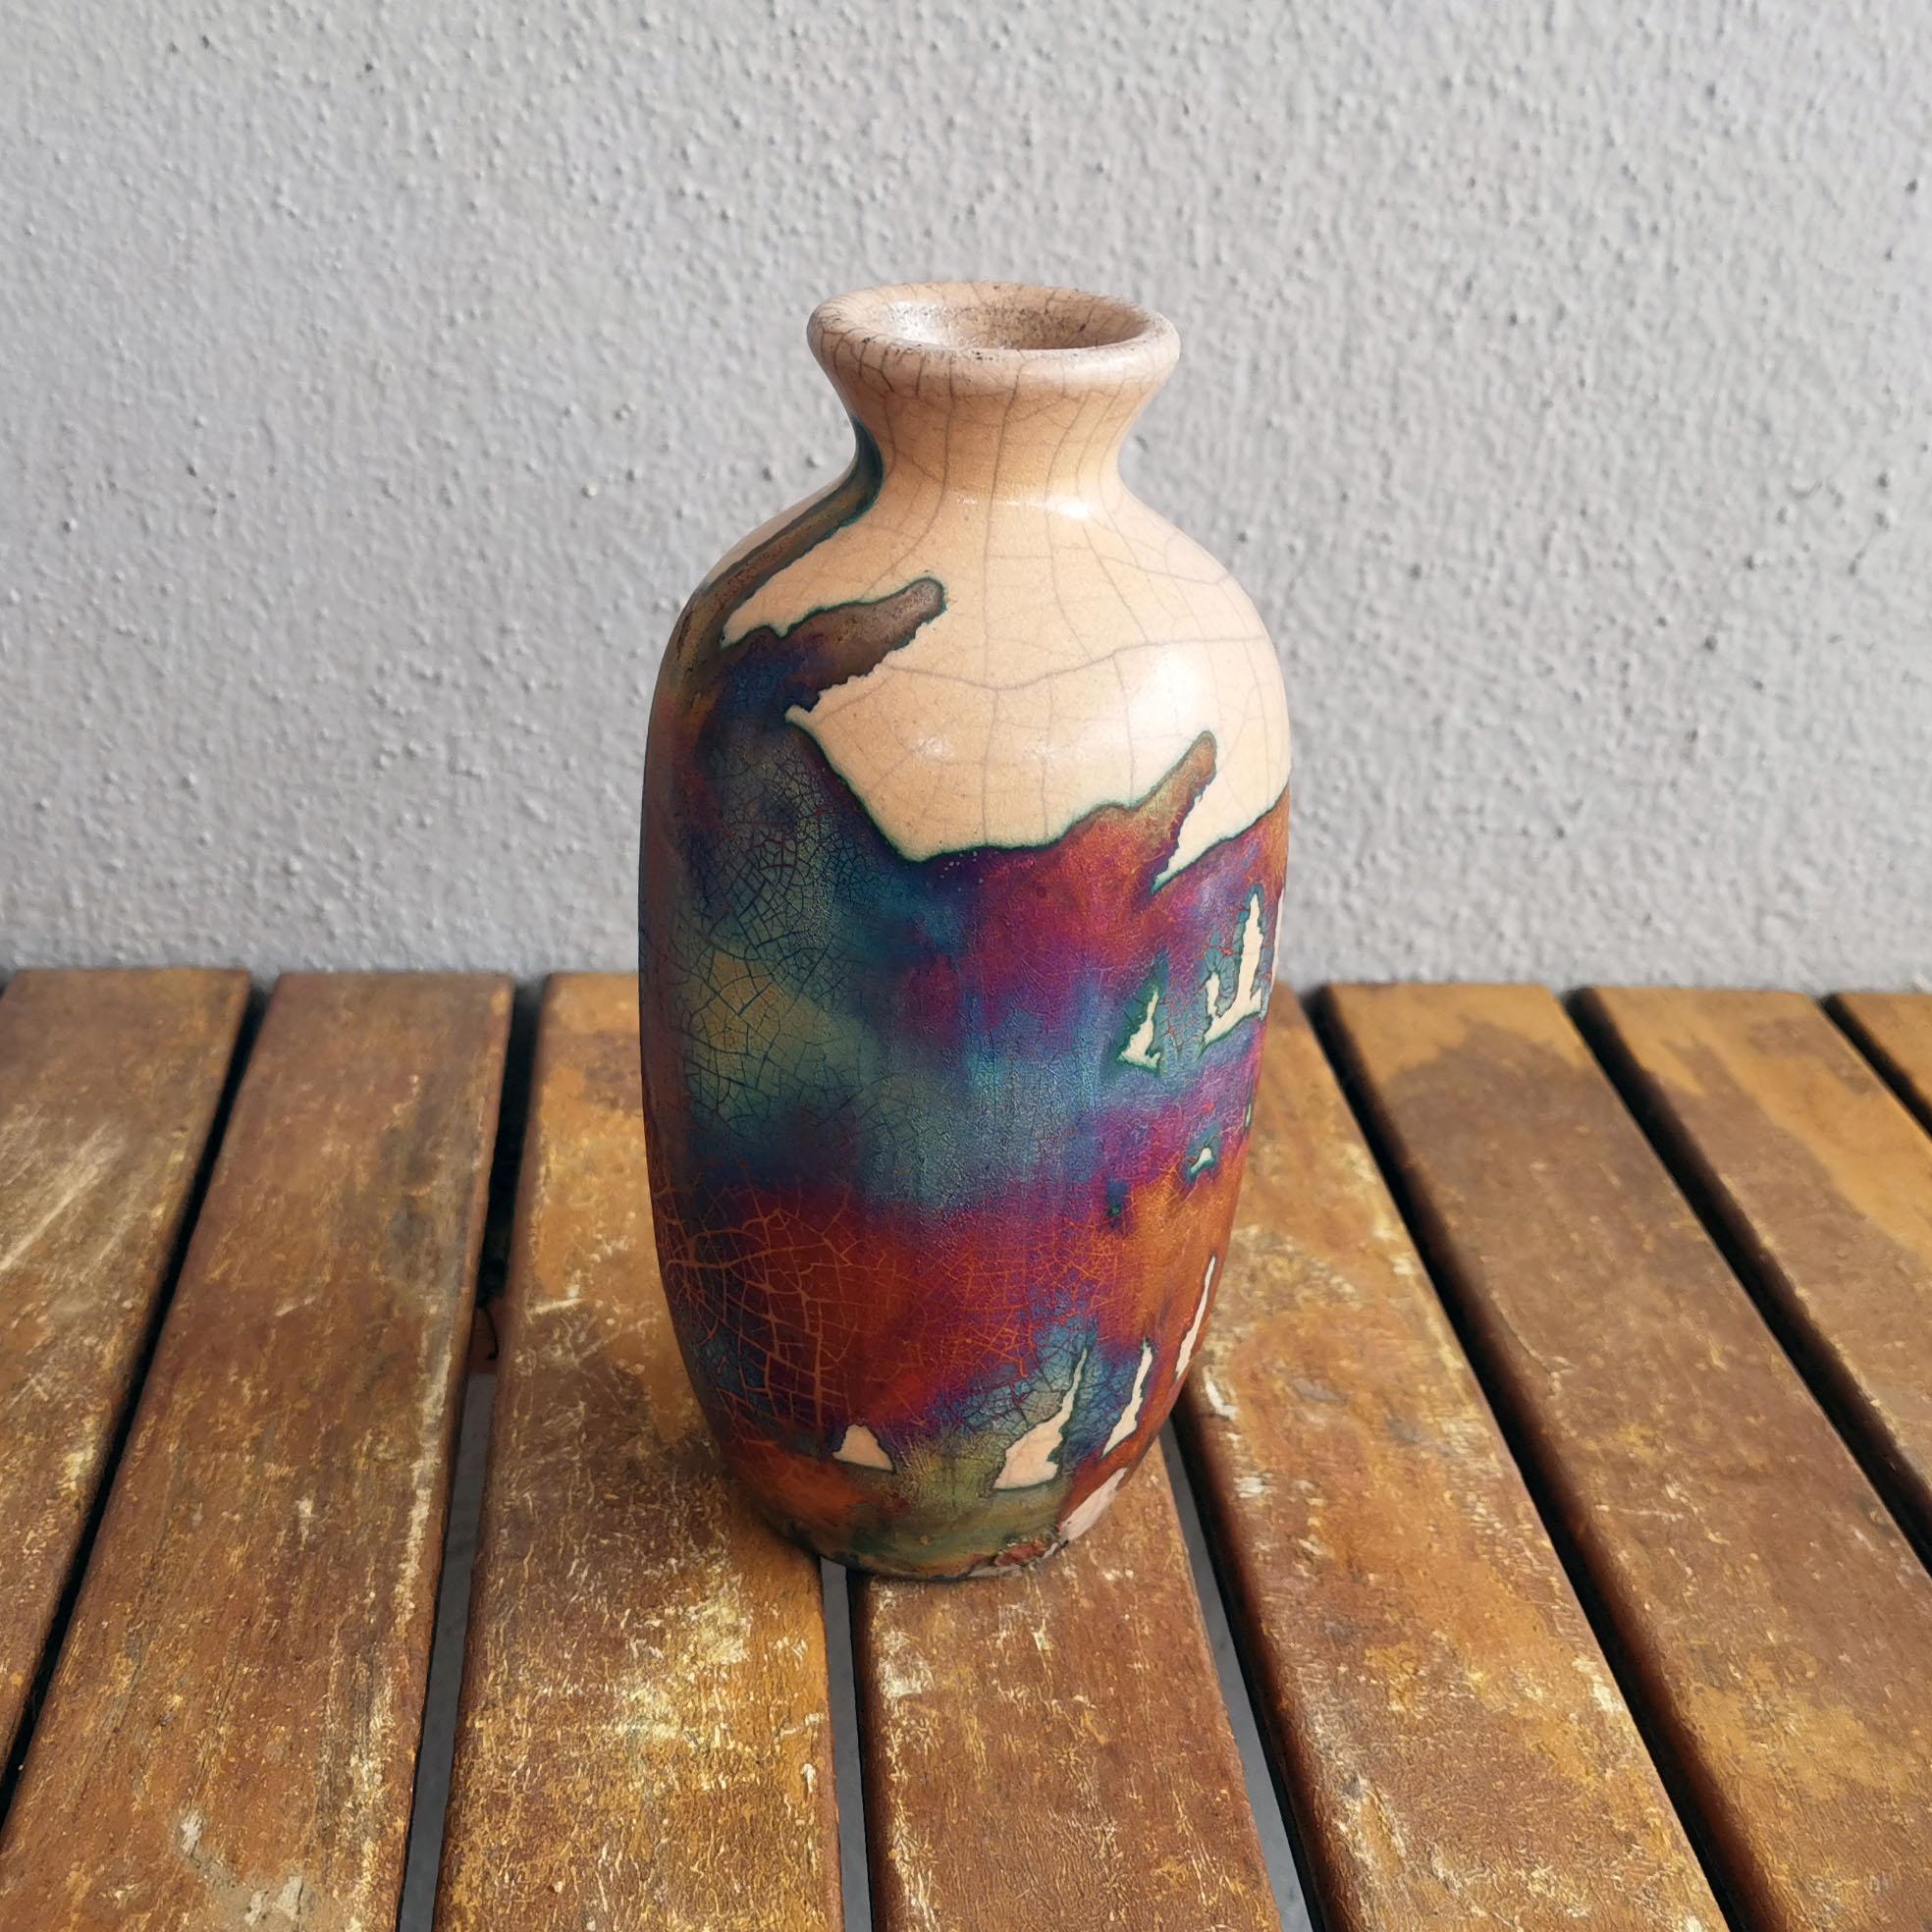 Koban (小判) - (n) oval

NEW AND IMPROVED : This vase comes with a waterproof tube insert for fresh flowers and cuttings. Insert width is 2cm/0.8 inches wide

The Koban vase is a classic bottle vase with an oval shape and narrow mouth. It’s the